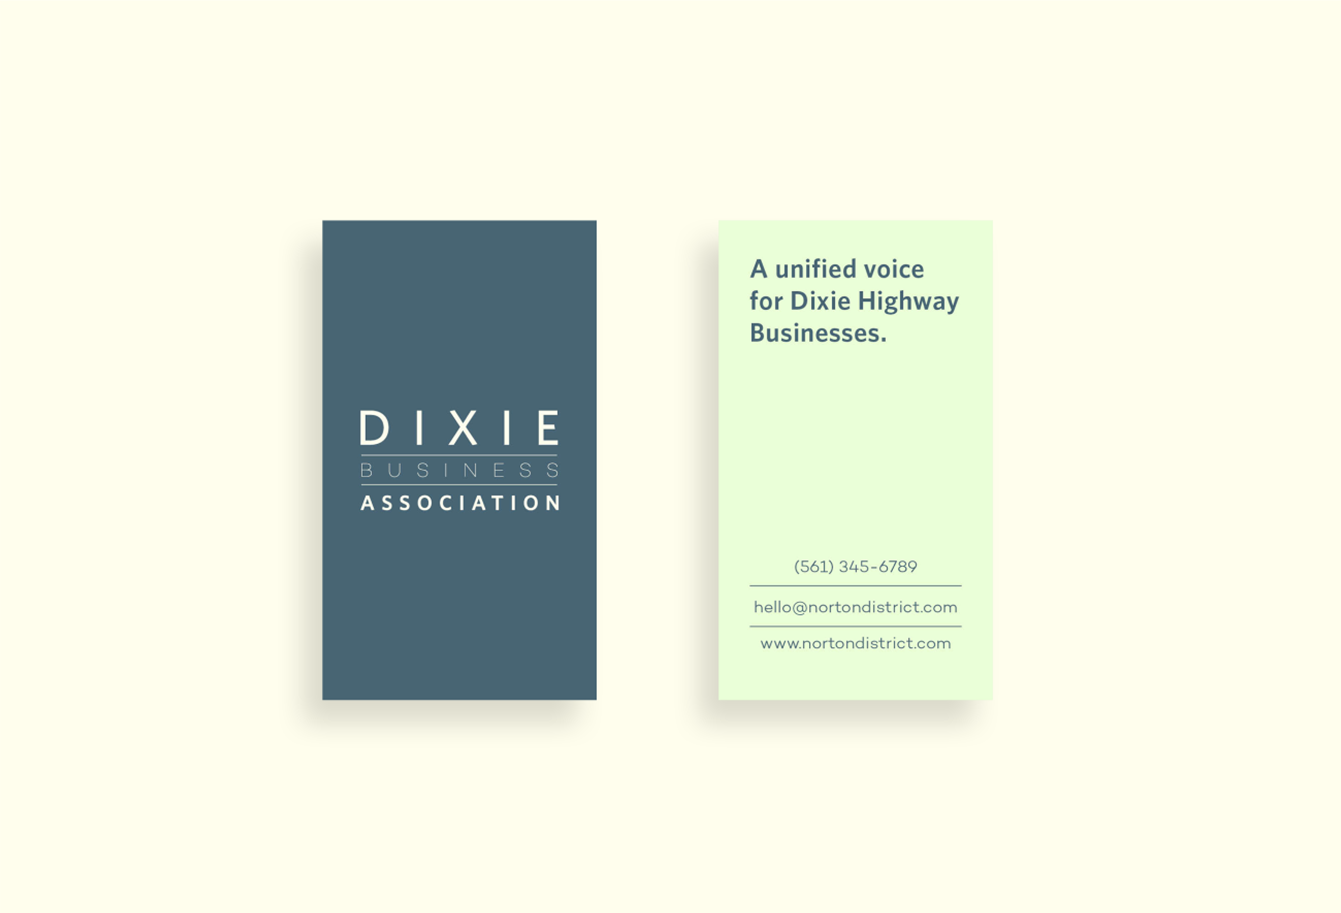 Business card mockups with the Dixie Business Association logo on the front in cream on a blue background, and the back features their tagline 